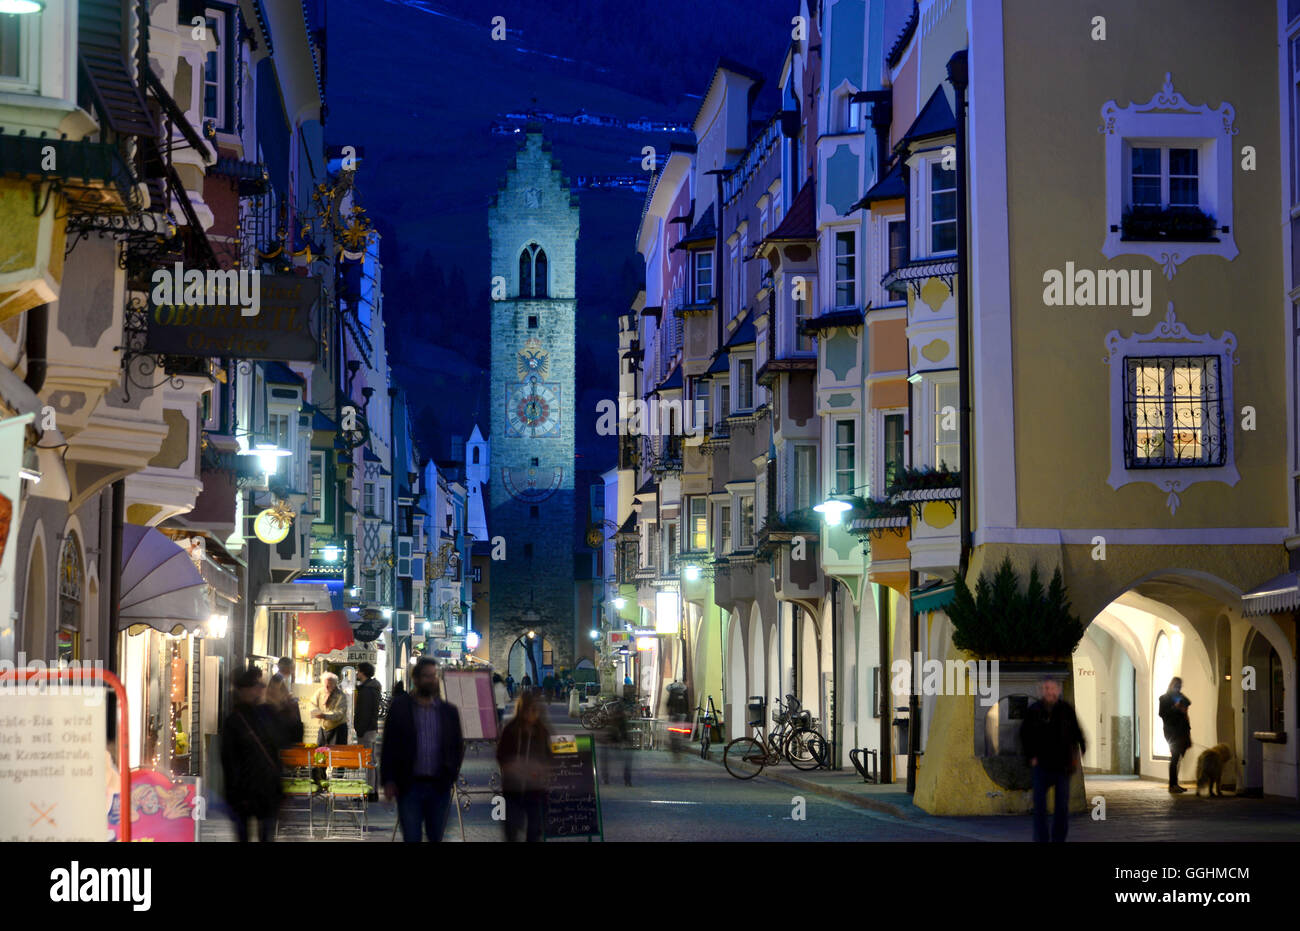 Main alley in Sterzing at night, Eisack valley, South Tyrol, Italy Stock Photo